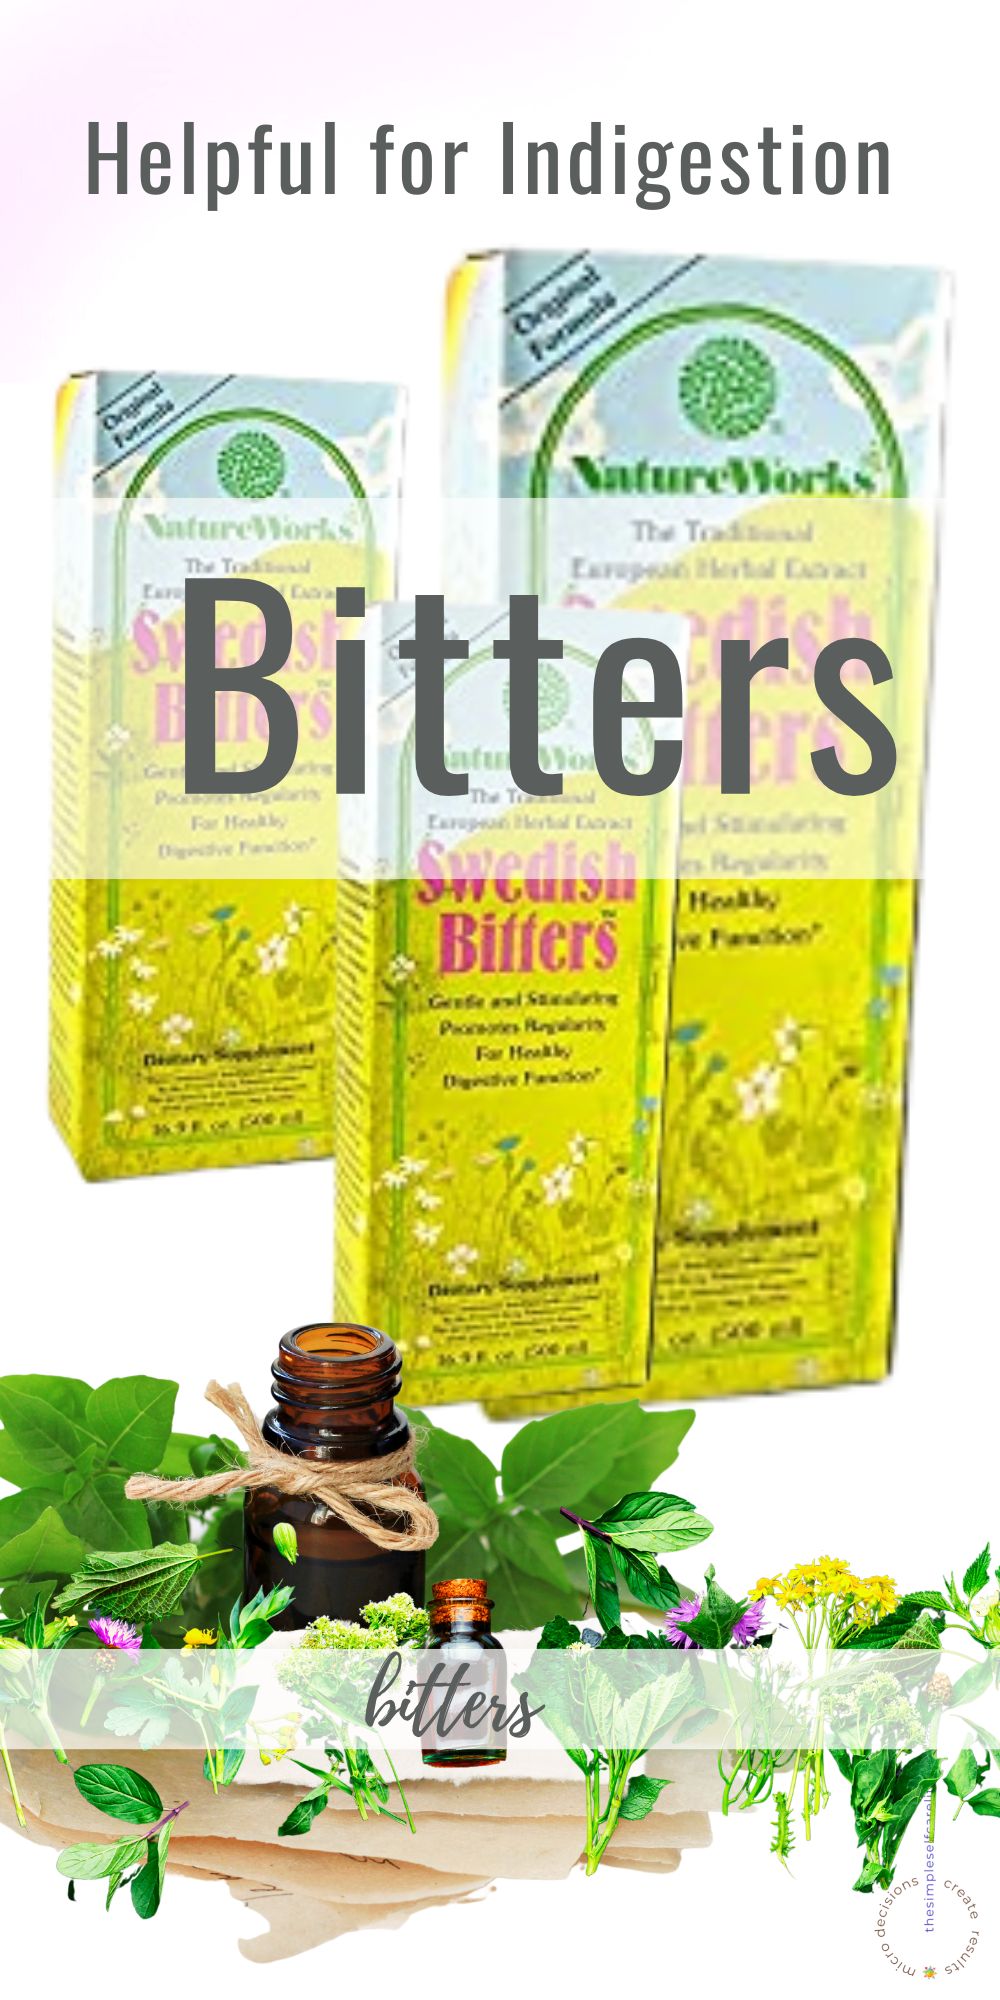 Bitters. Hepful for Indigestion and photos of Swedish Bitters